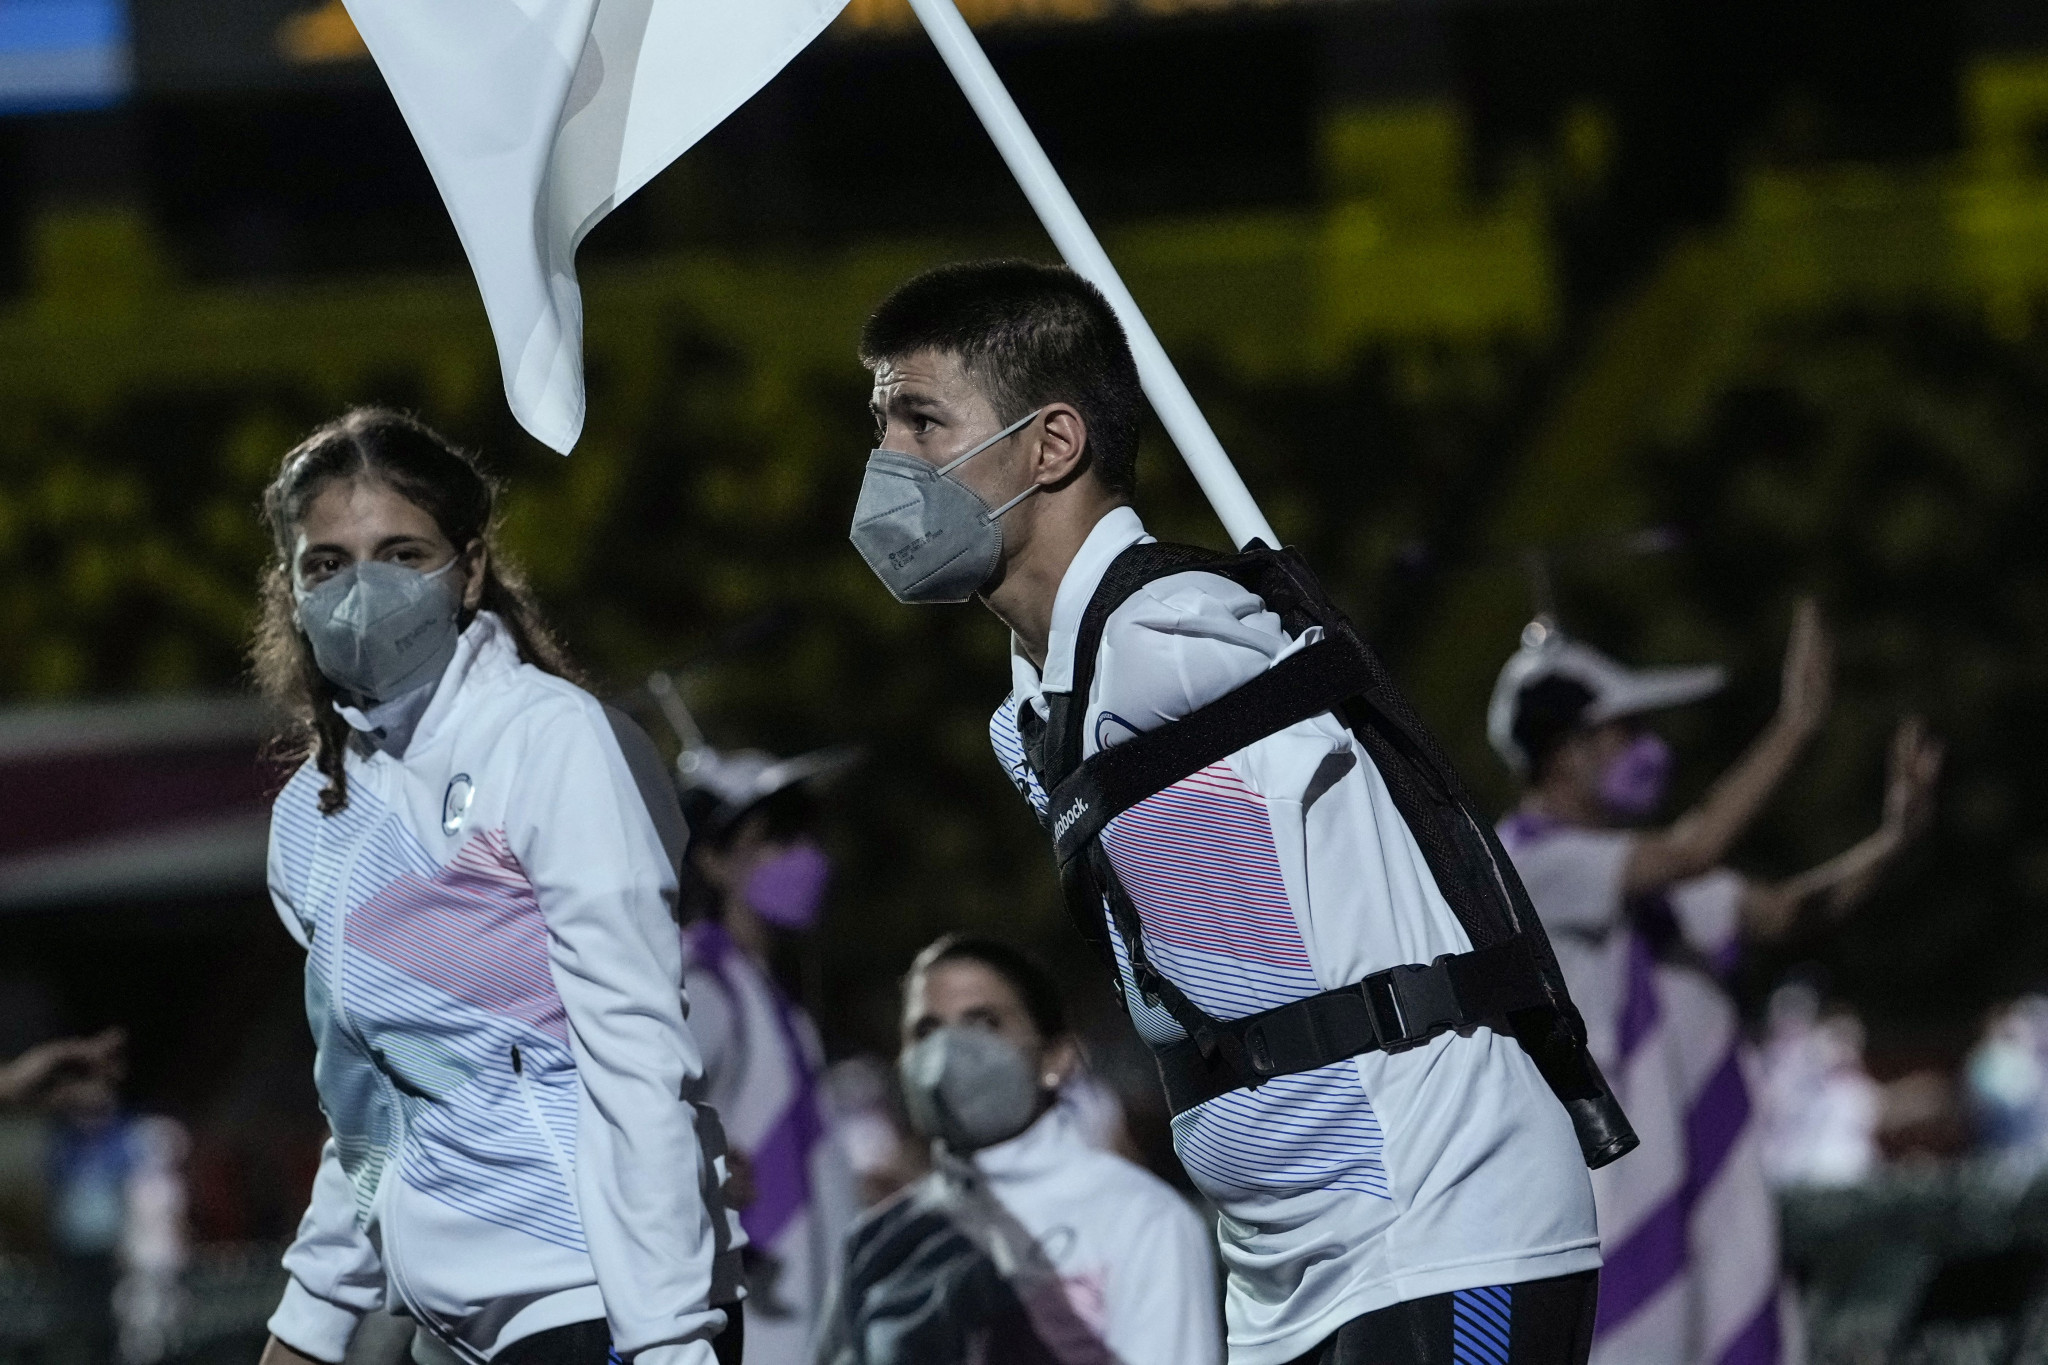 Alia Issa and Abbas Karimi were the flagbearers for the first official Refugee Paralympic Team at the Tokyo 2020 Paralympics Opening Ceremony ©Getty Images